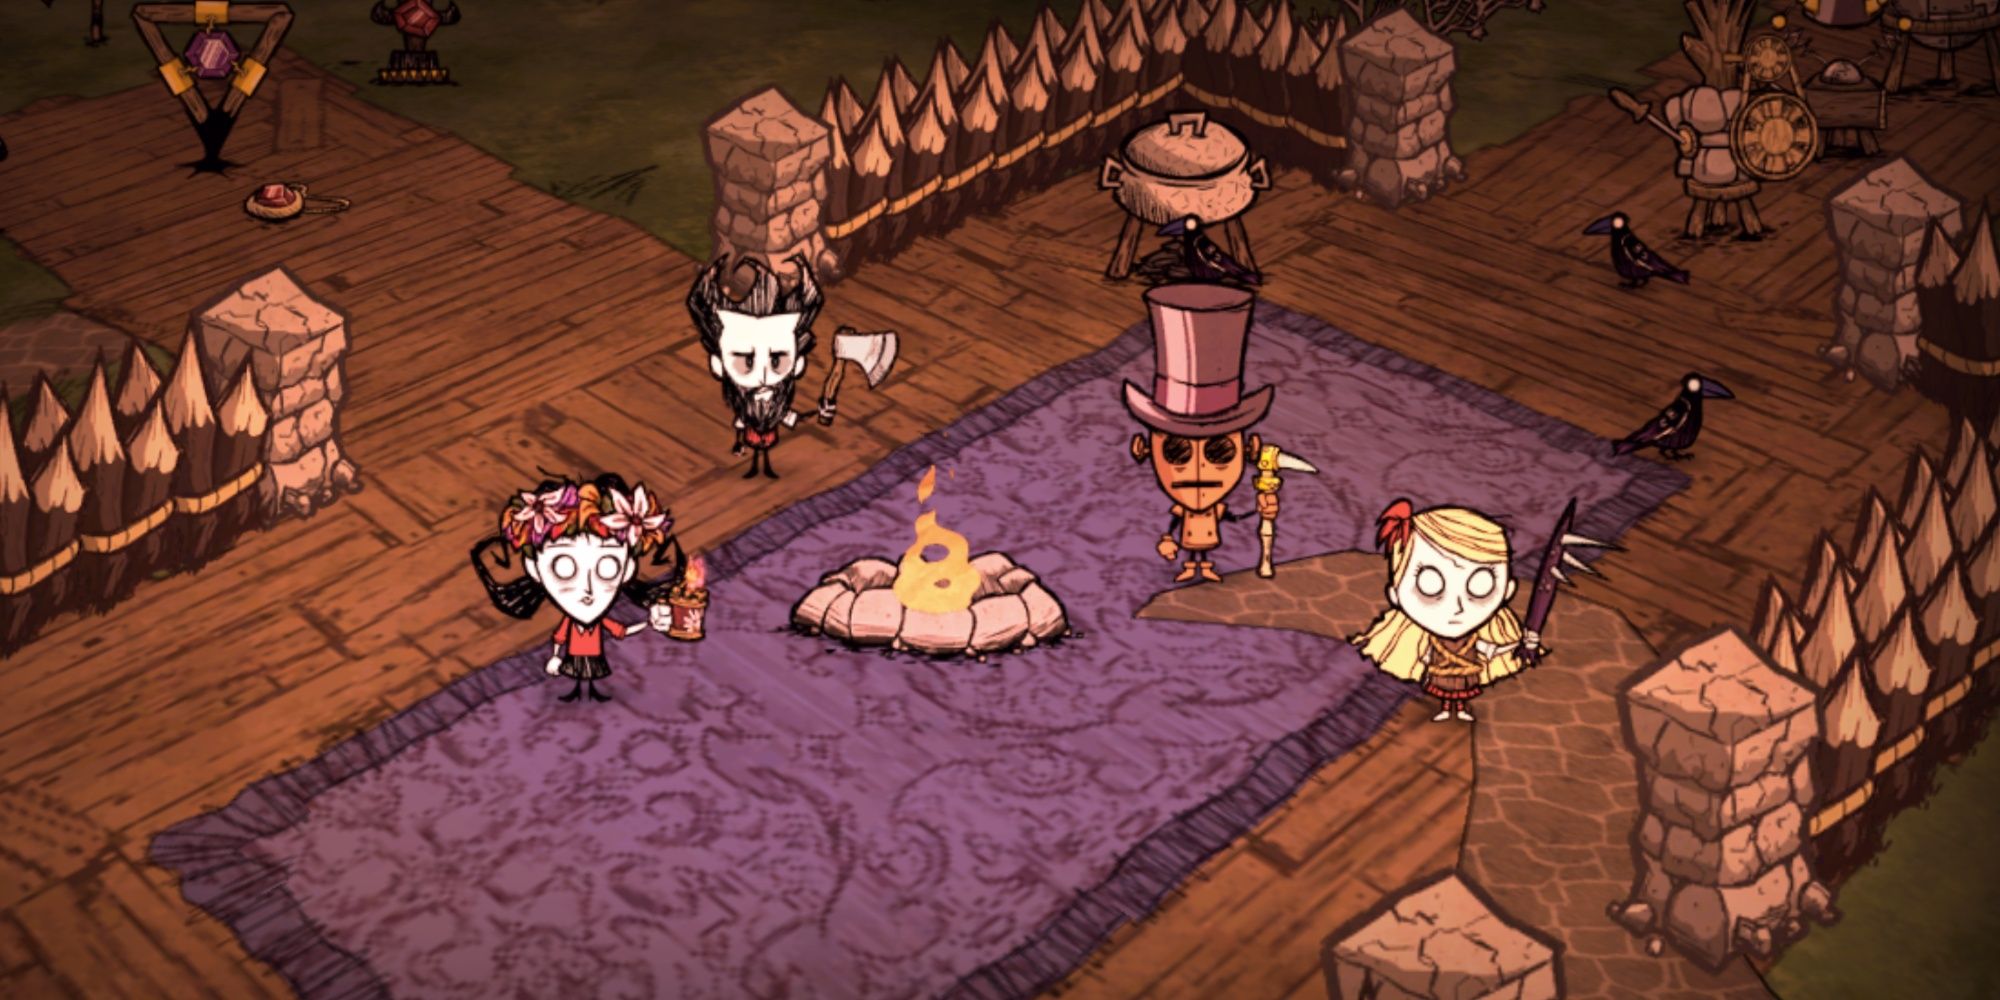 Wilson, Willow, WX-78, Wendy dans Don't Starve Together